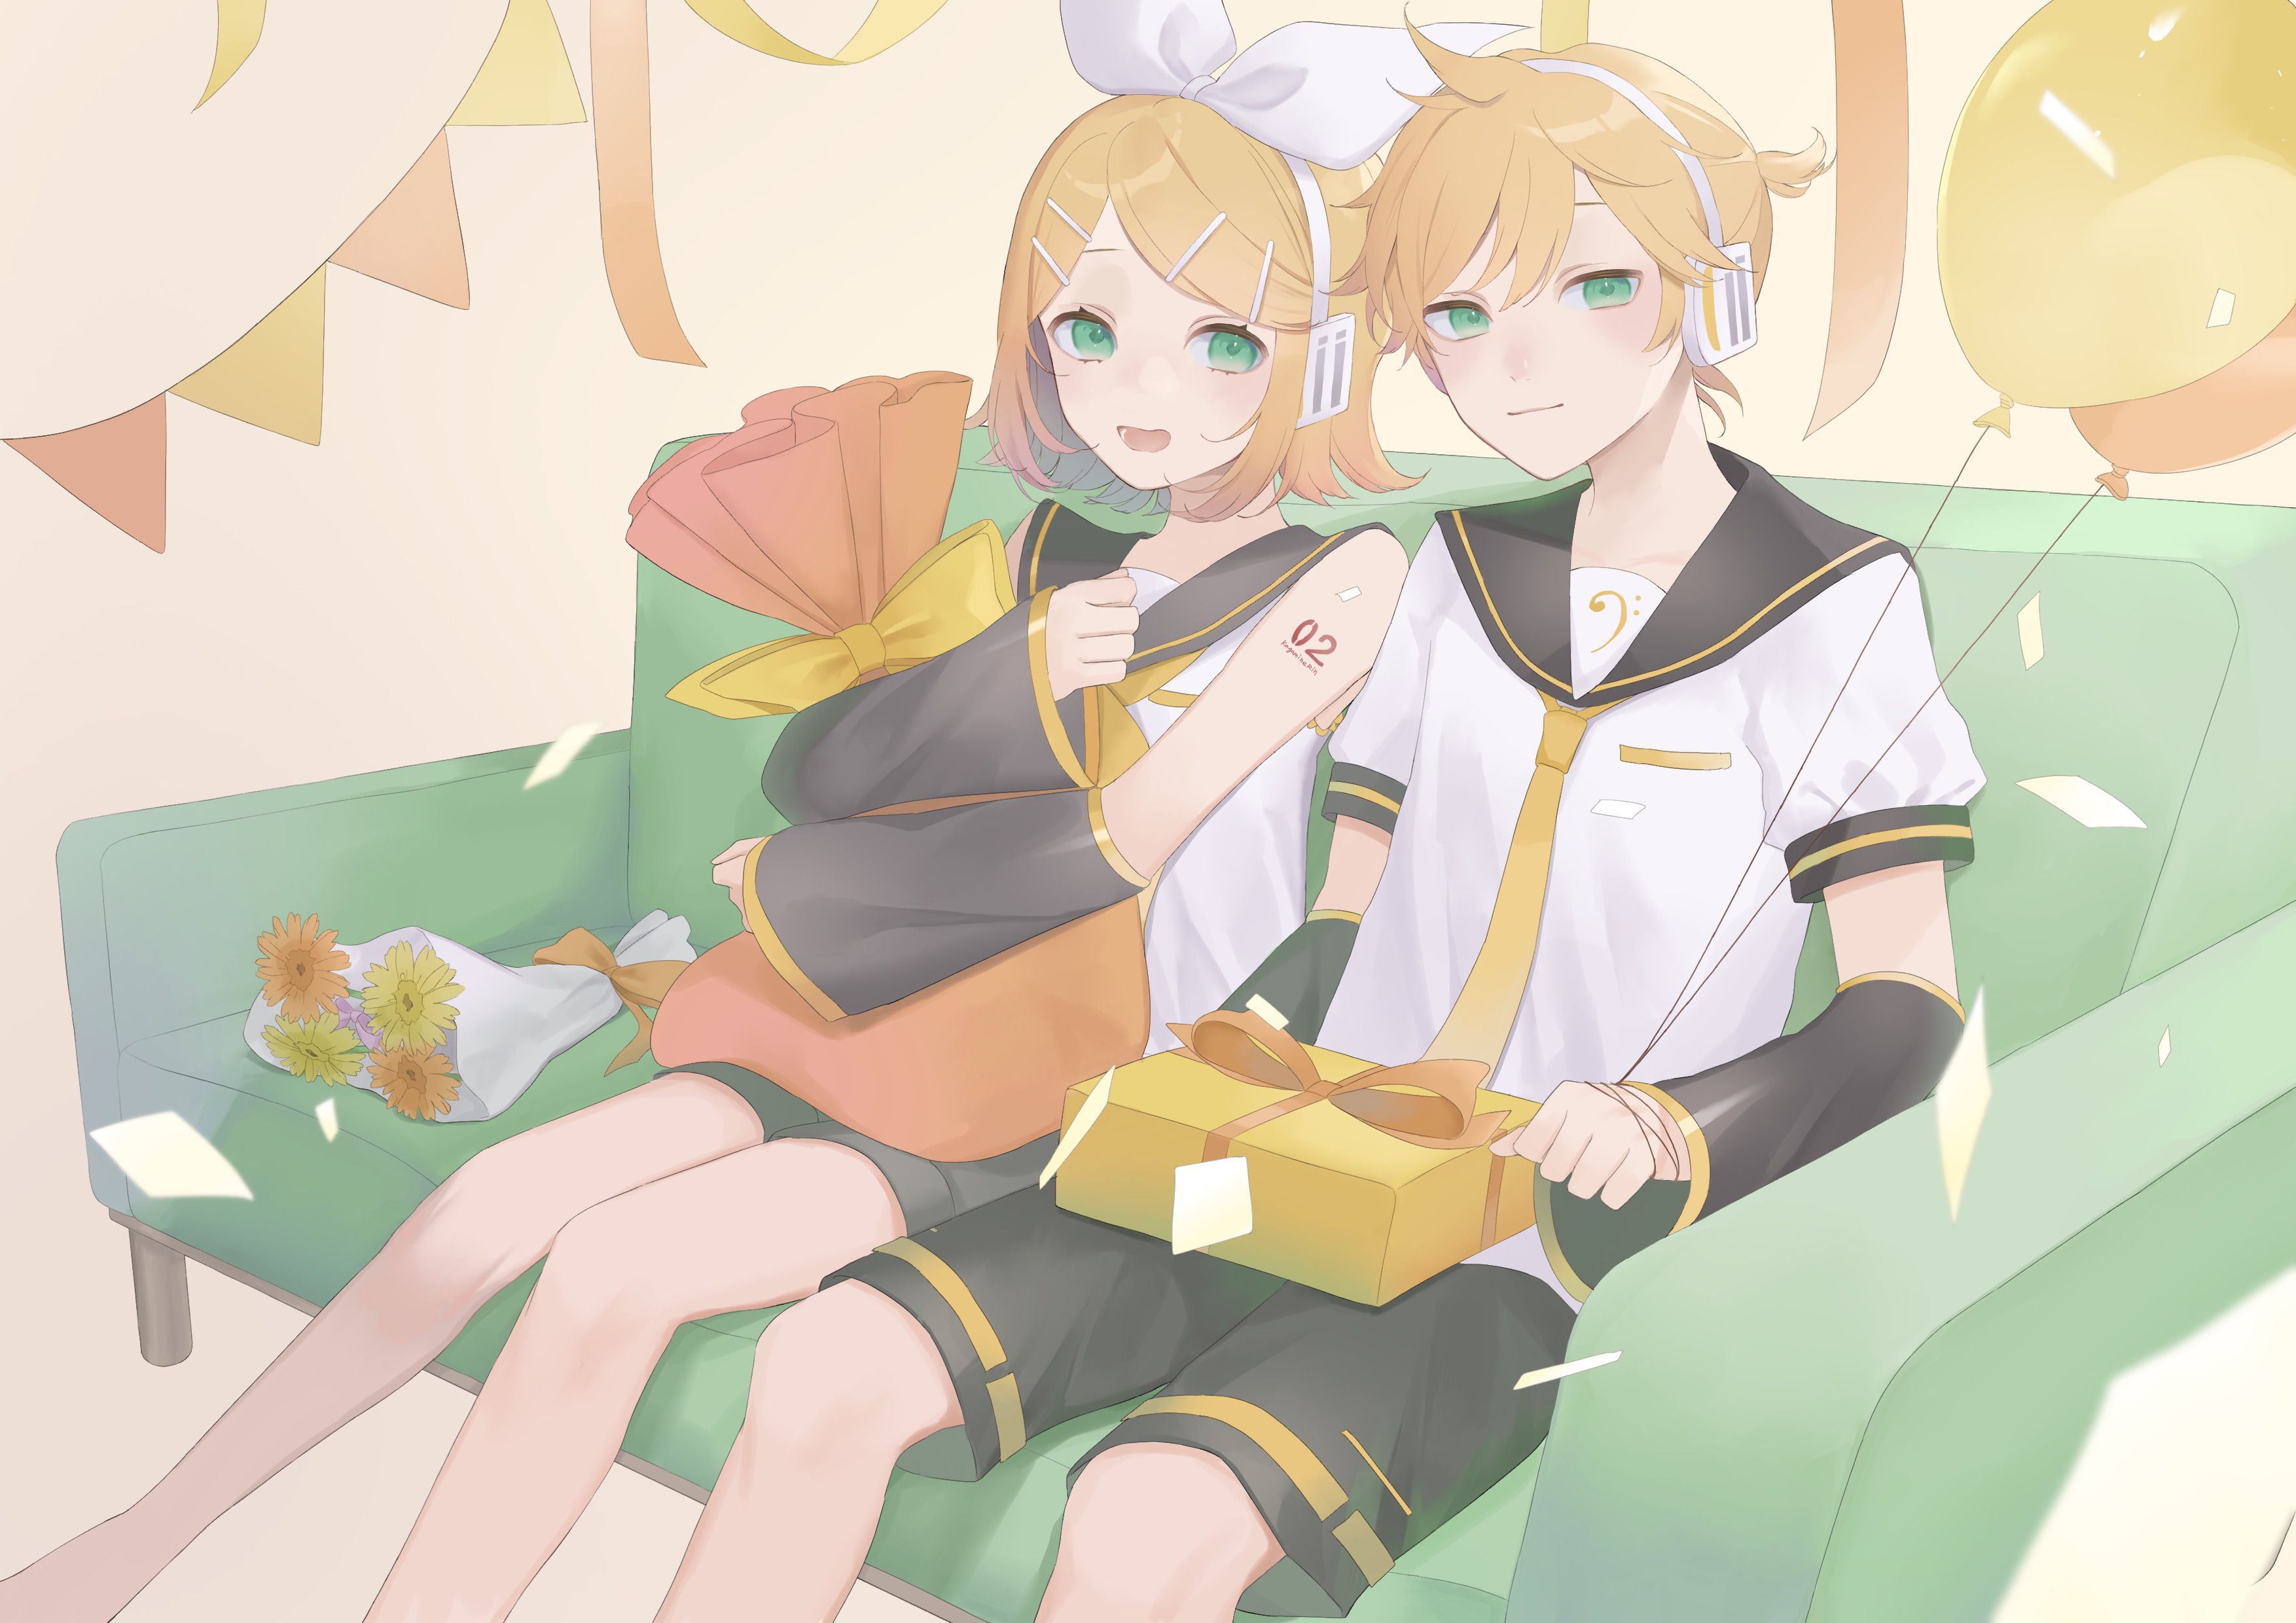 Mobile wallpaper: Anime, Vocaloid, Rin Kagamine, Len Kagamine, 1057425 download the picture for free